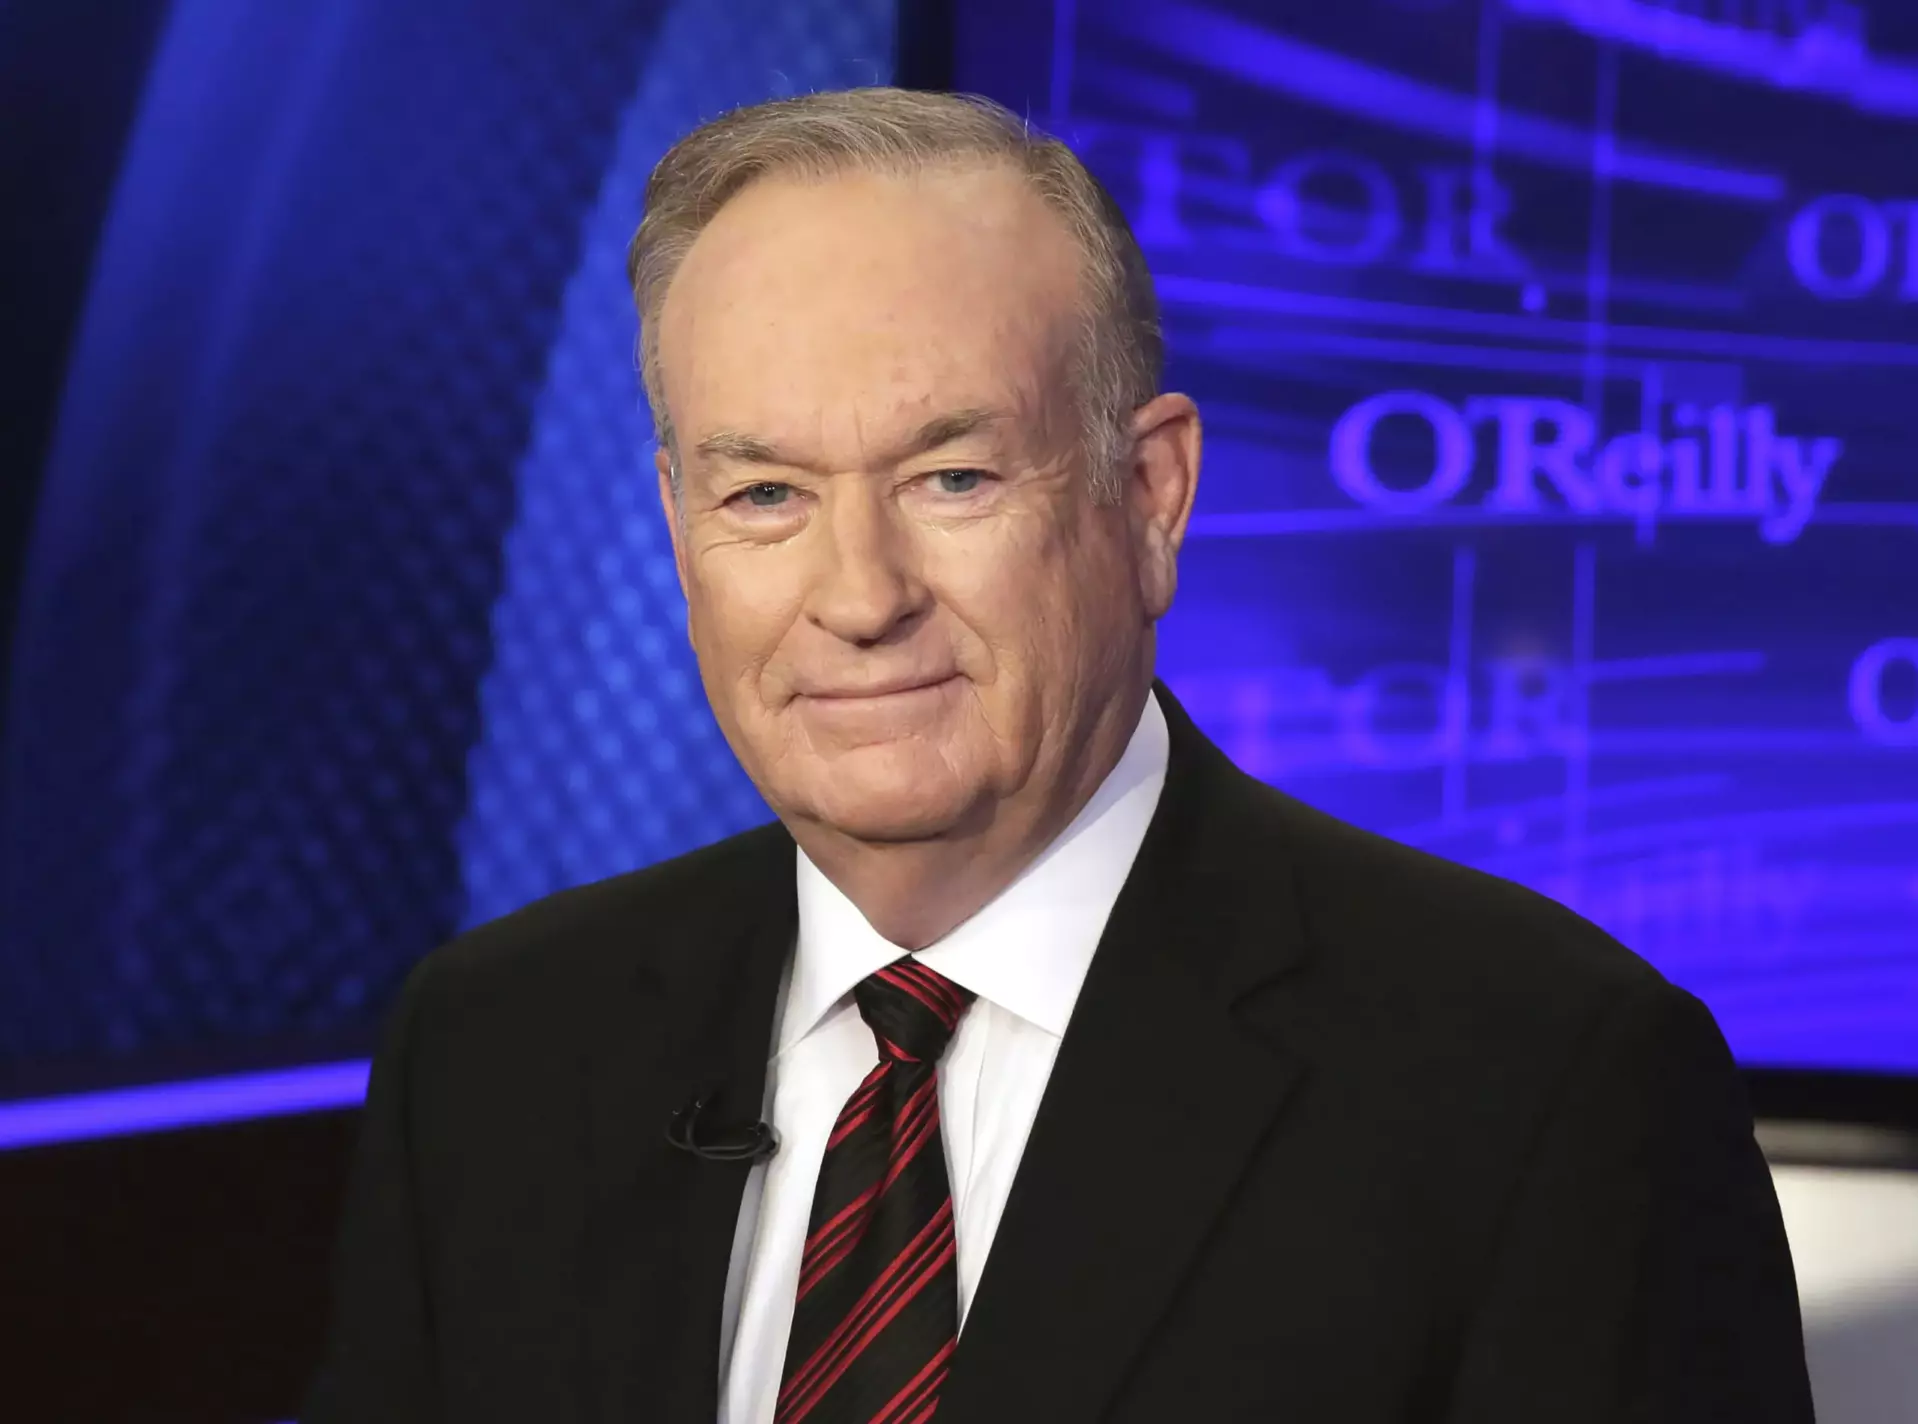 How rich is Bill O'Reilly?